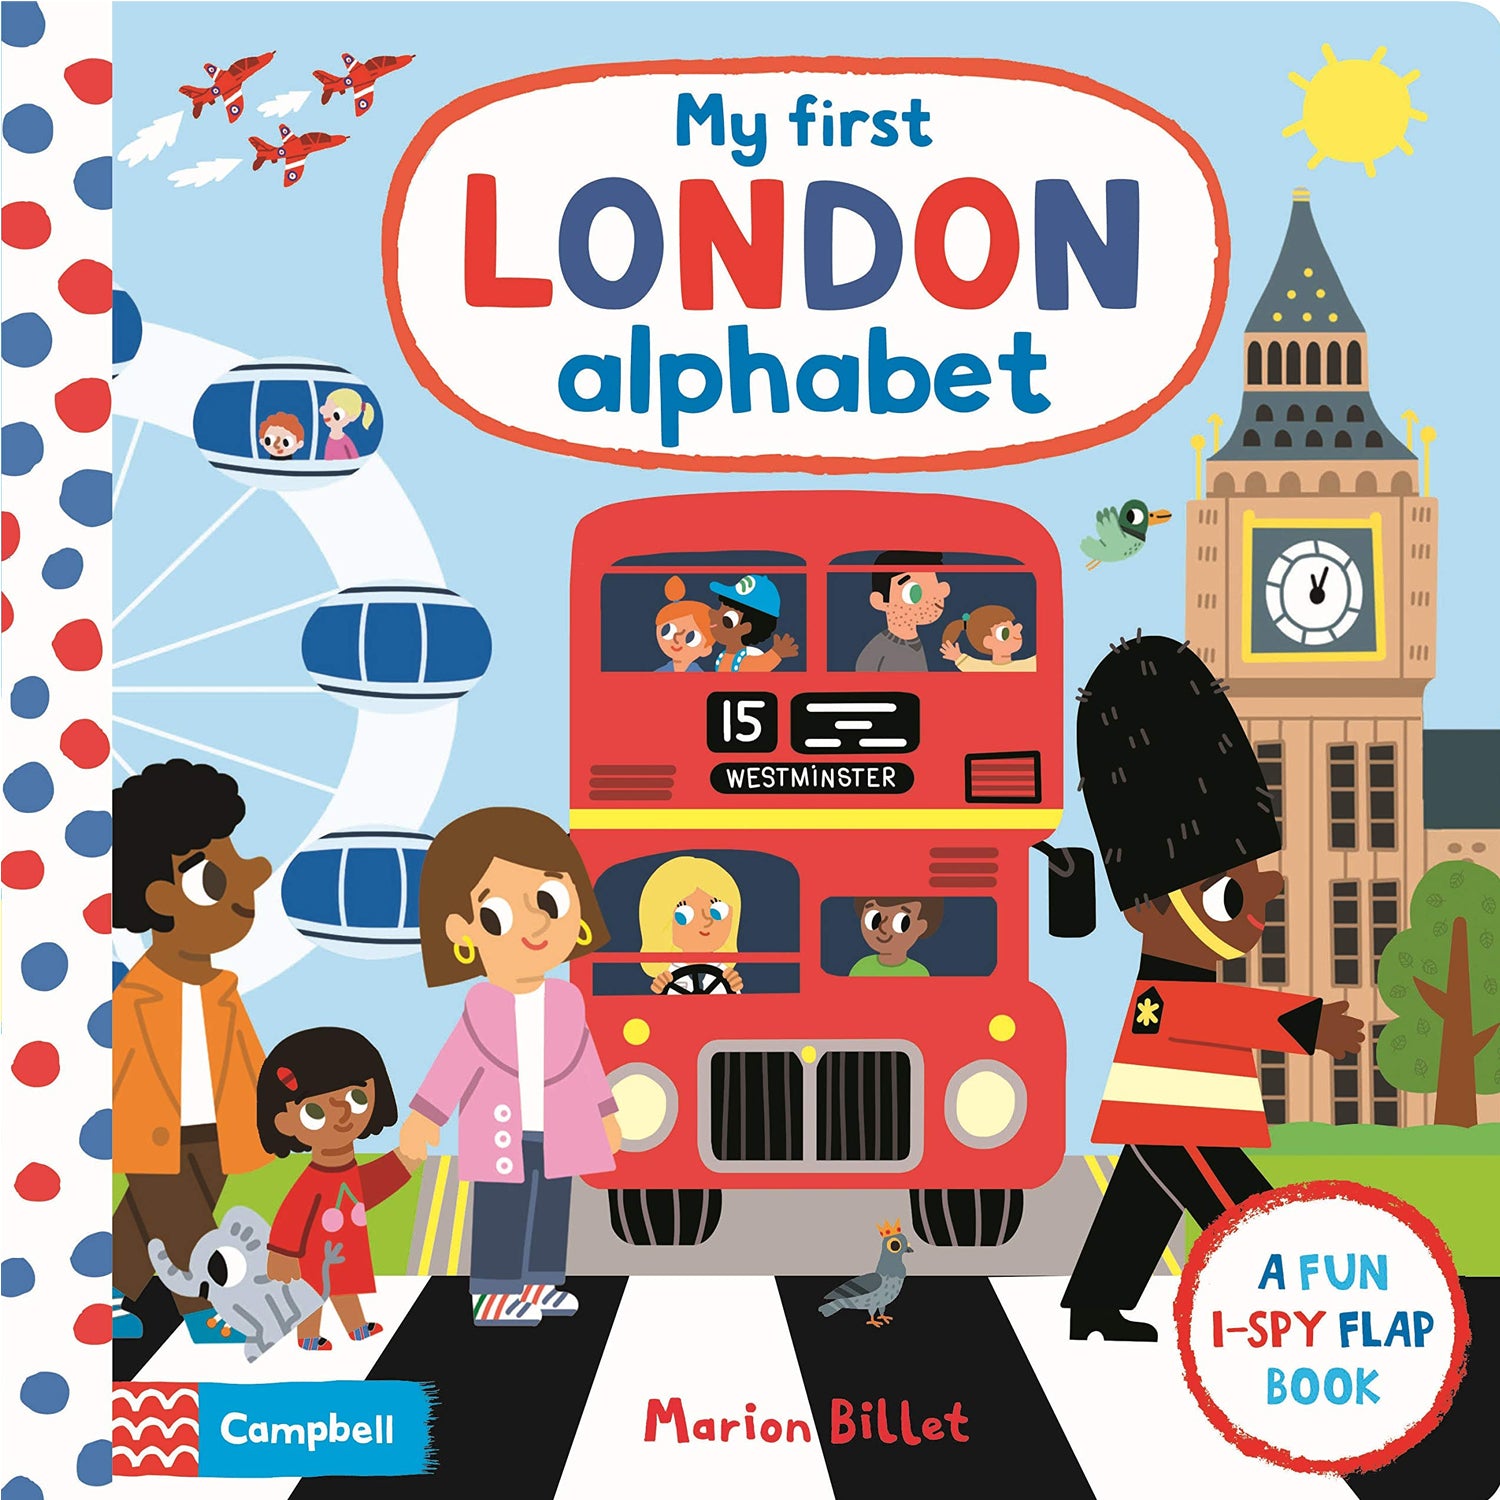 My First London Alphabet by Marion Billet - I-Spy Flap Book